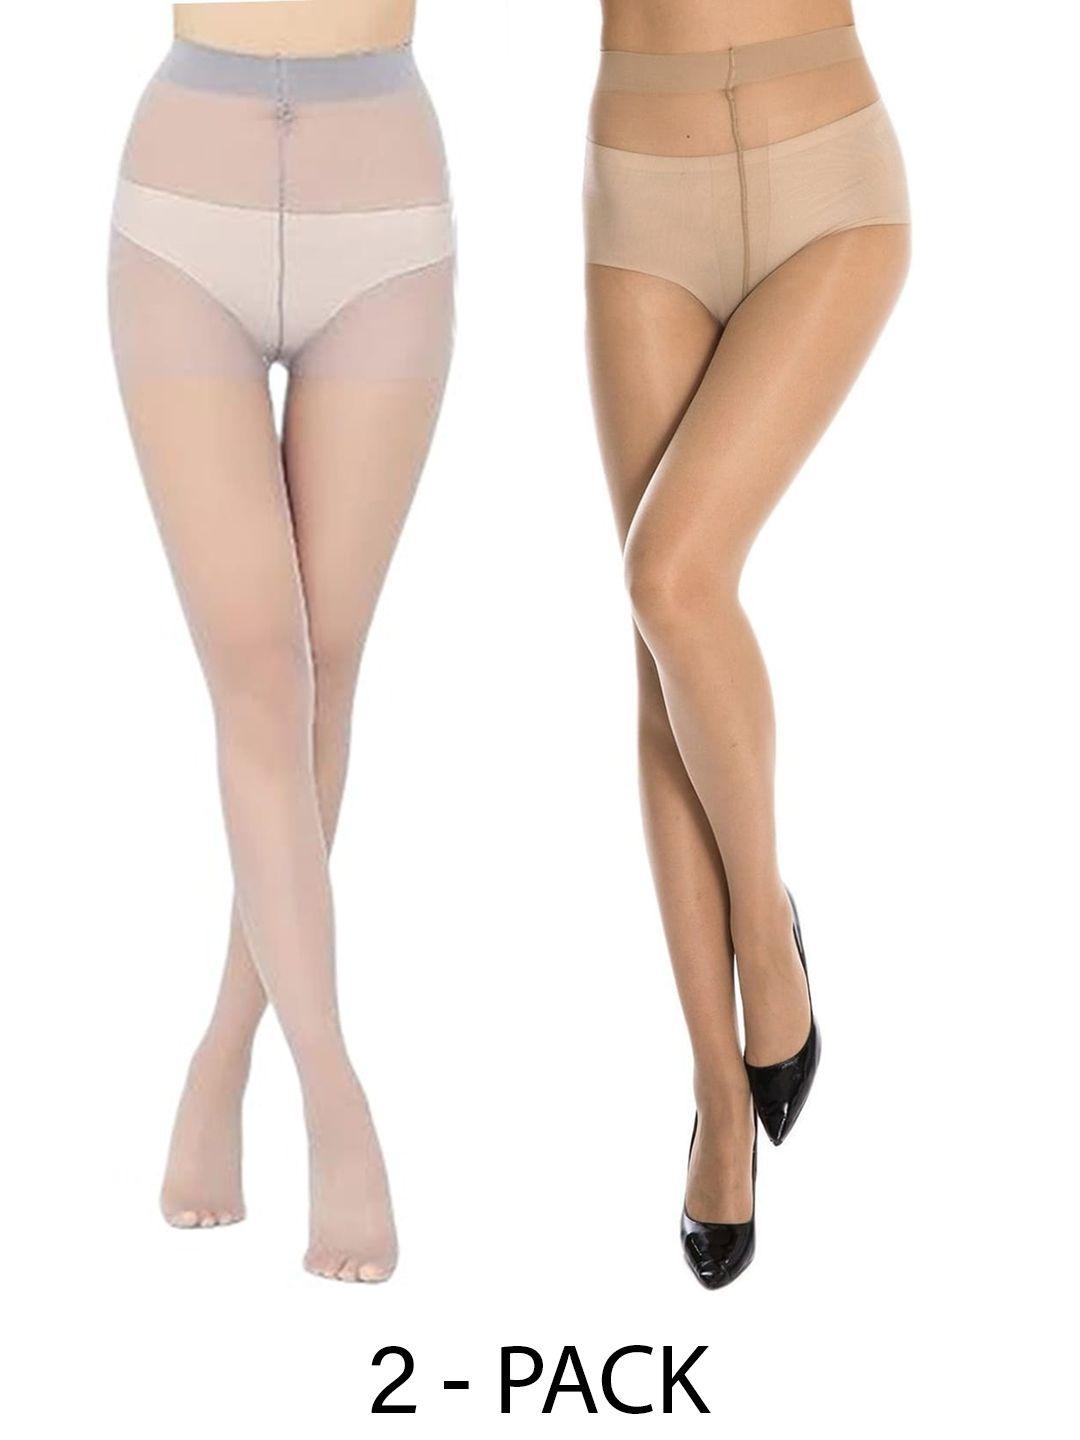 baesd set of 2 transparent stretchable stockings